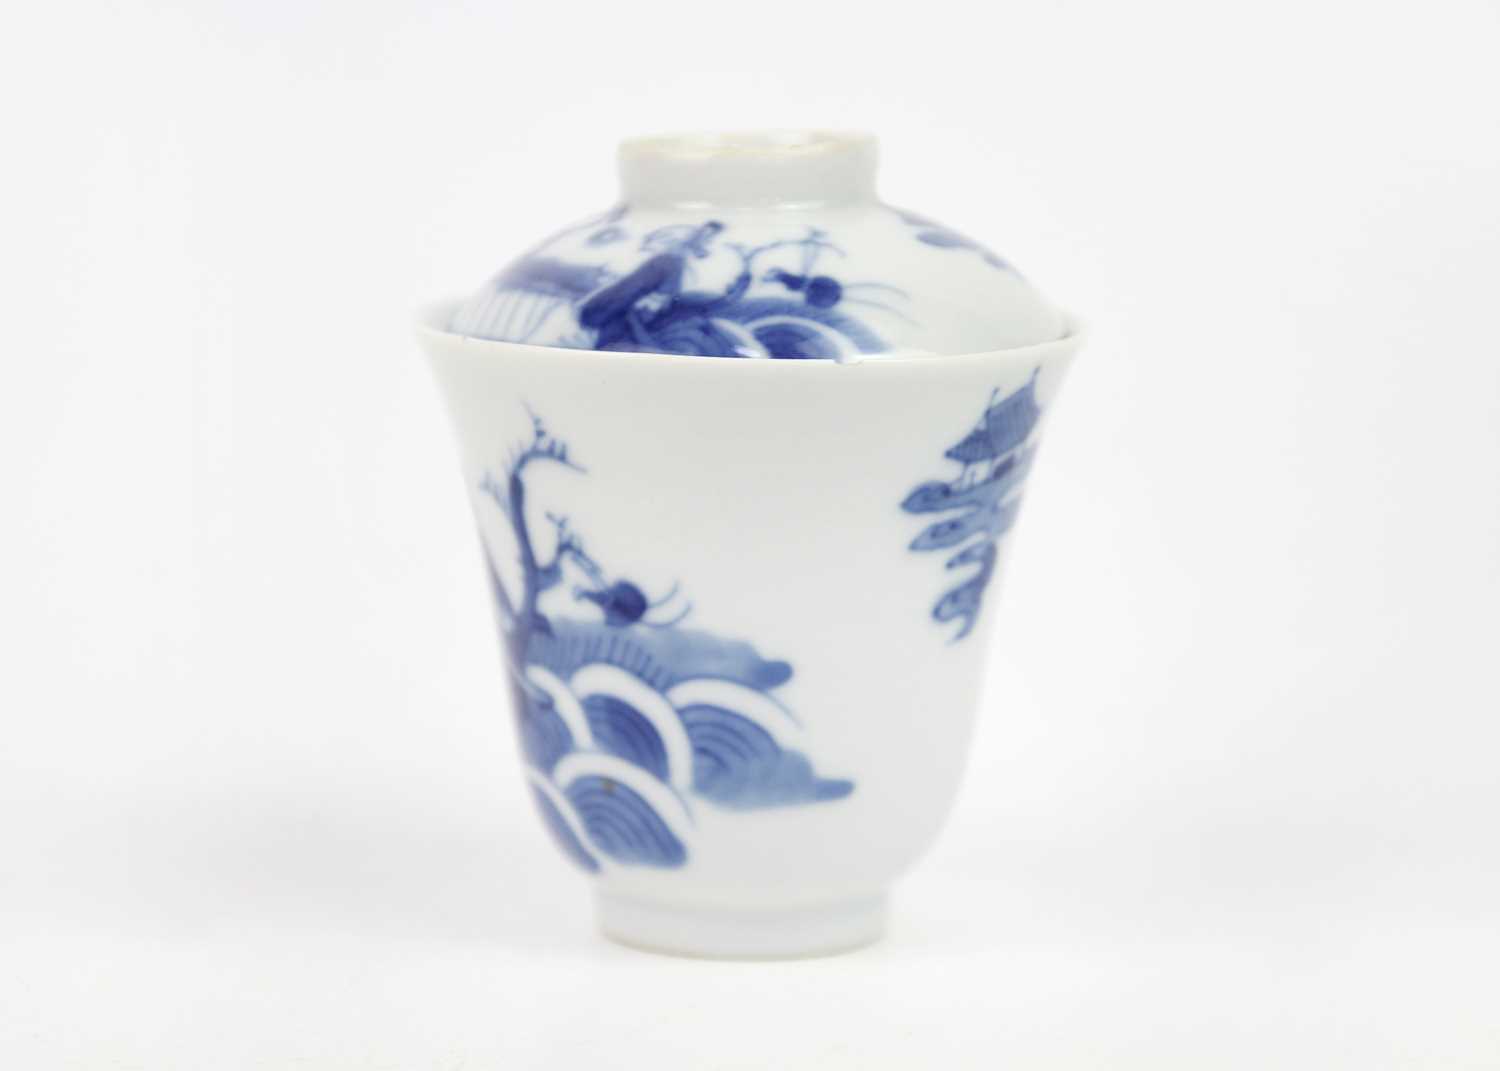 A set of Chinese blue and white porcelain cups, covers and stands, 18th century. - Image 6 of 41